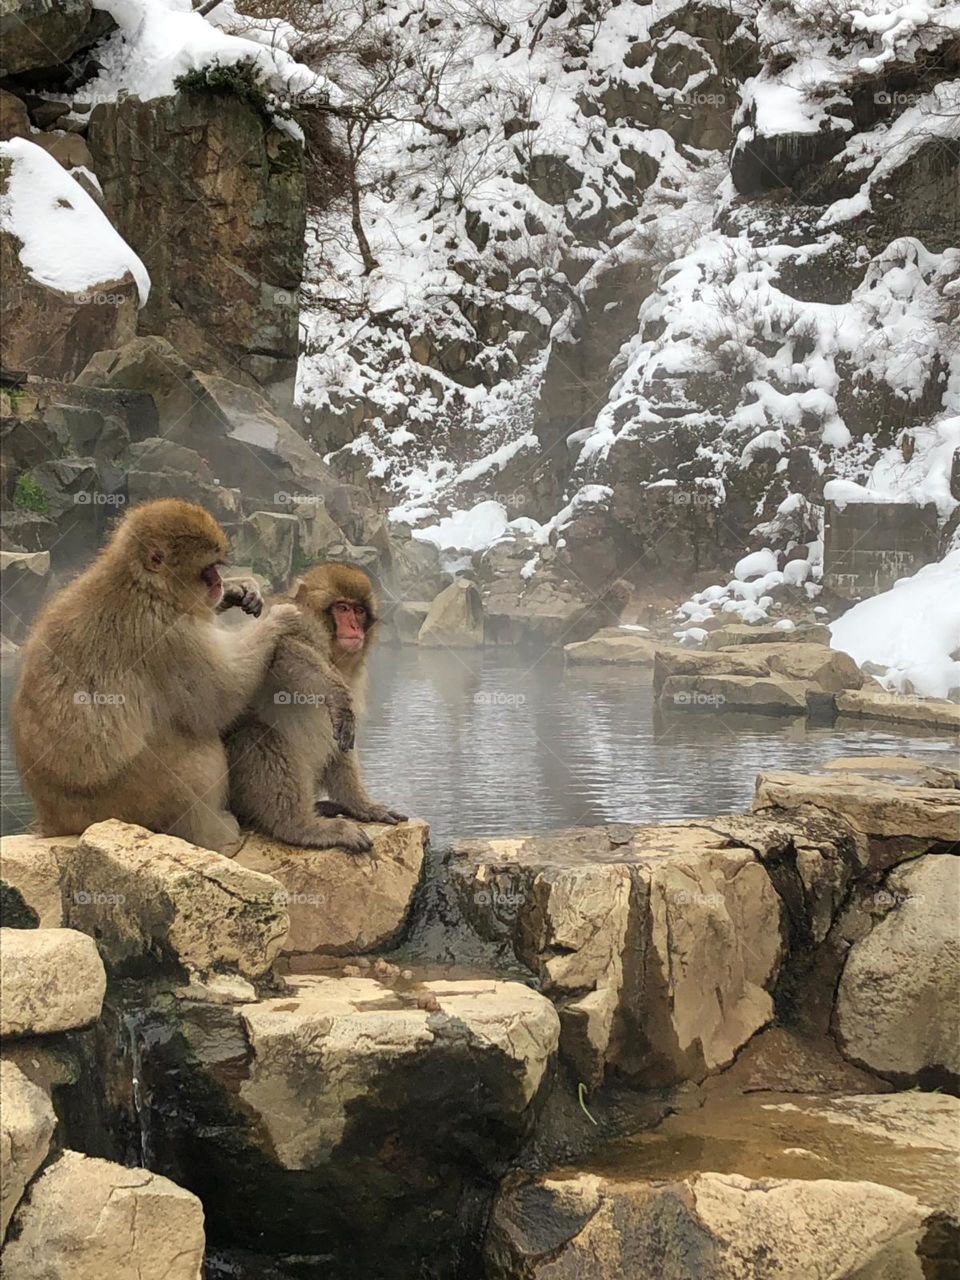 Monkeys in the natural hot tub.